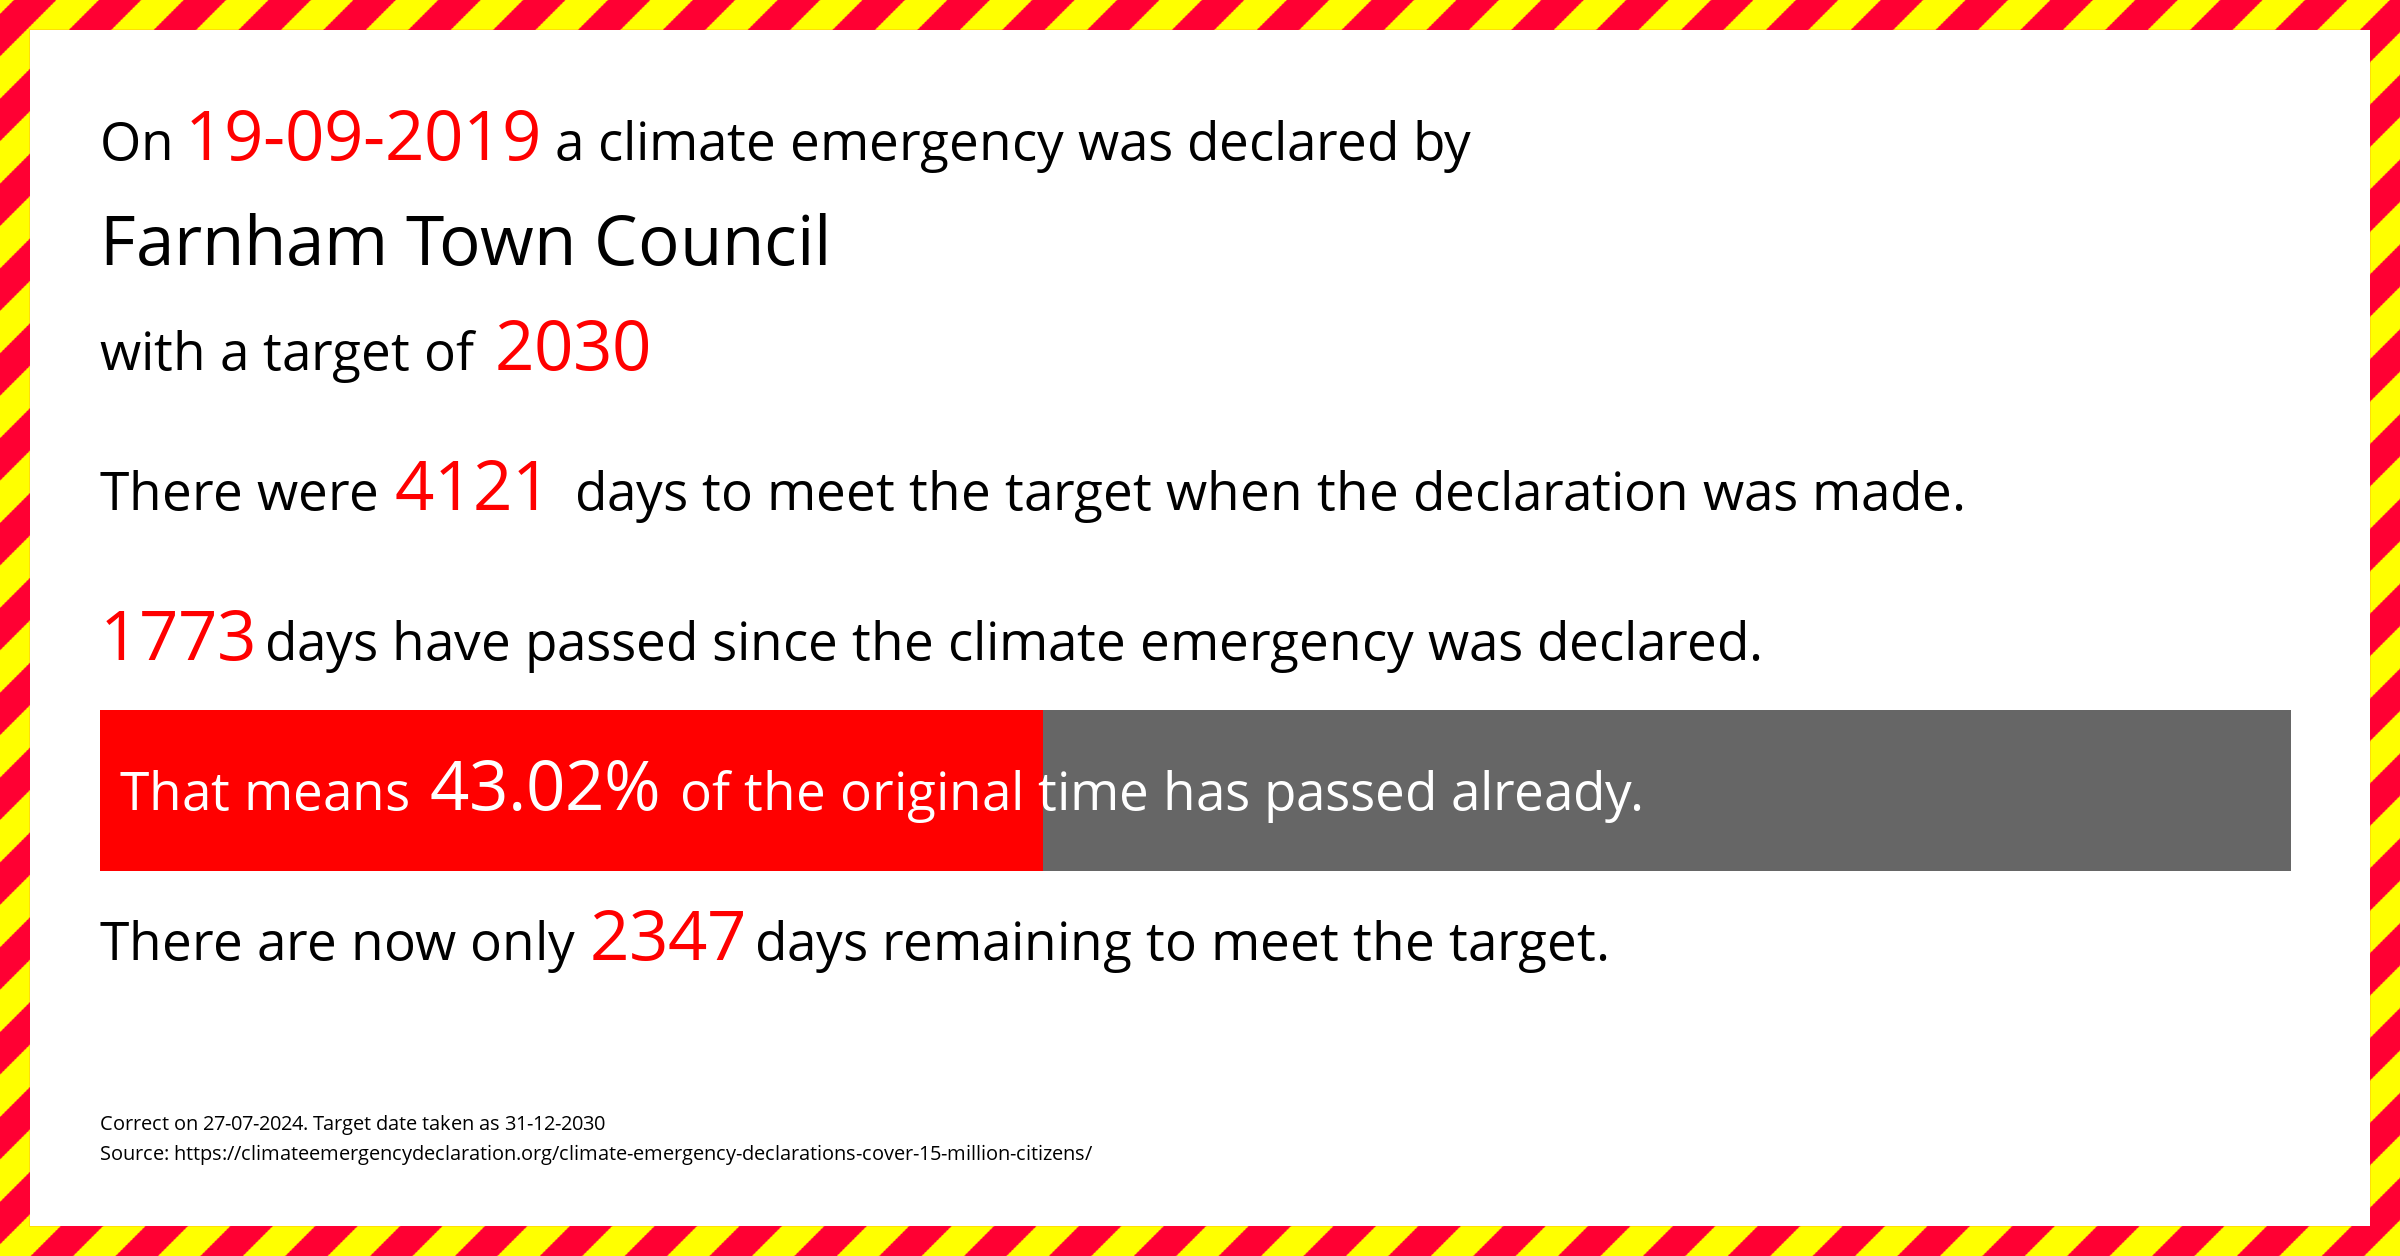 Farnham Town Council declared a Climate emergency on Thursday 19th September 2019, with a target of 2030.